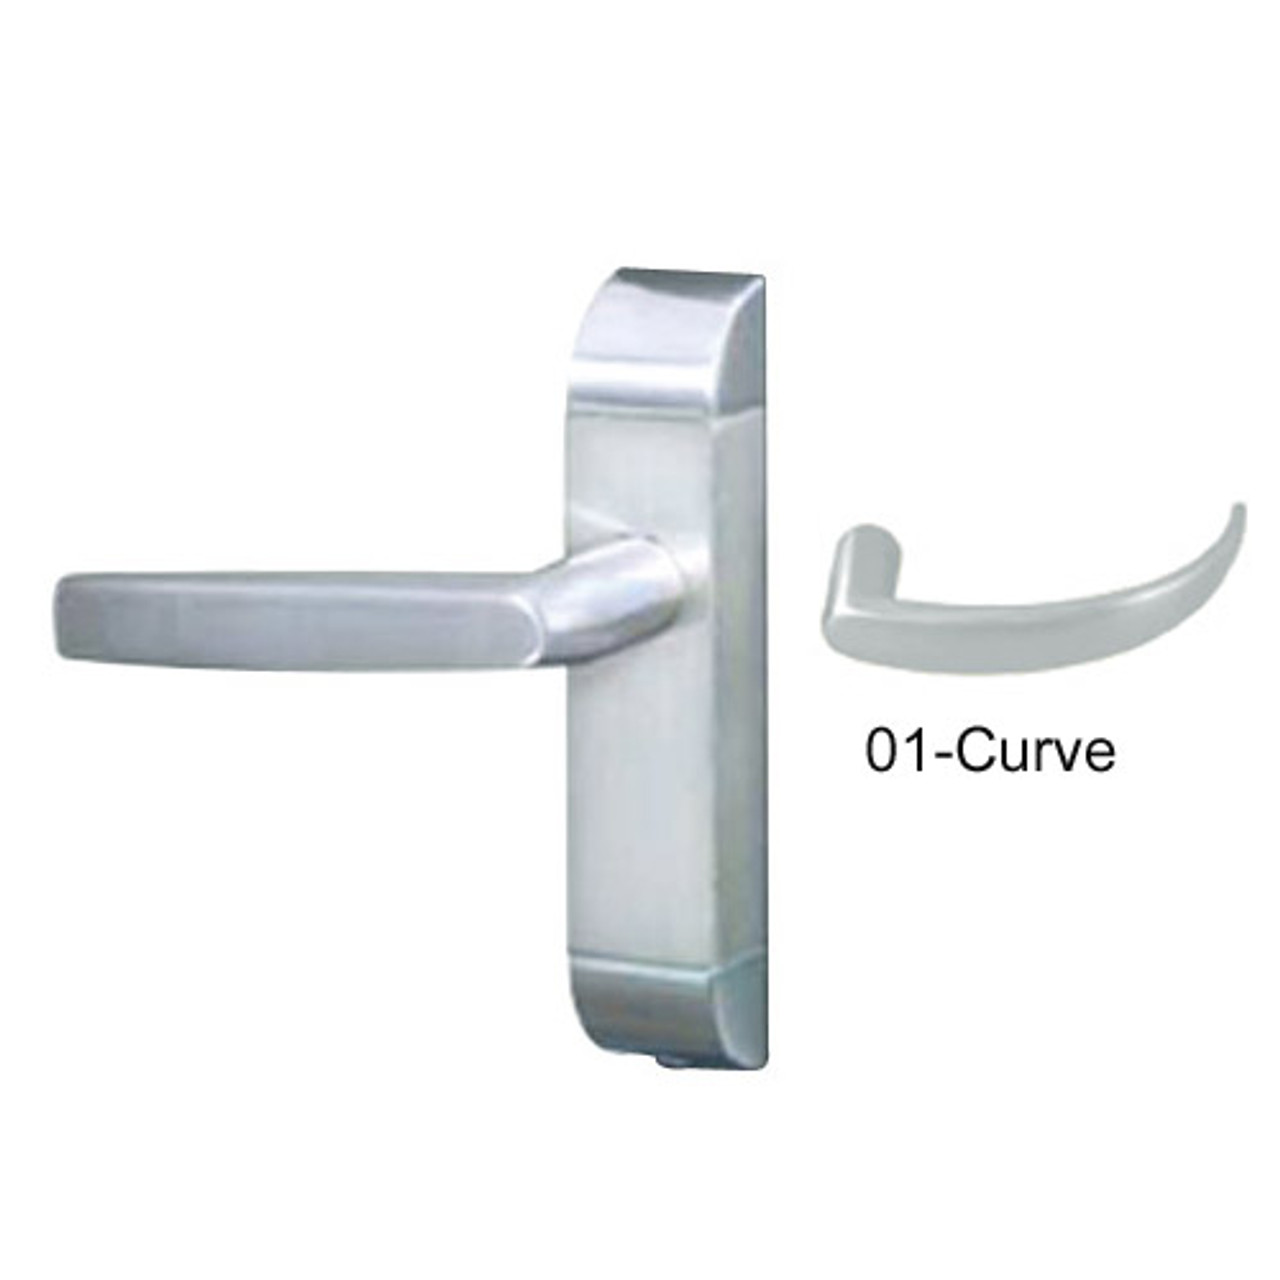 4600M-01-532-US32 Adams Rite Heavy Duty Curve Deadlatch Handles in Bright Stainless Finish